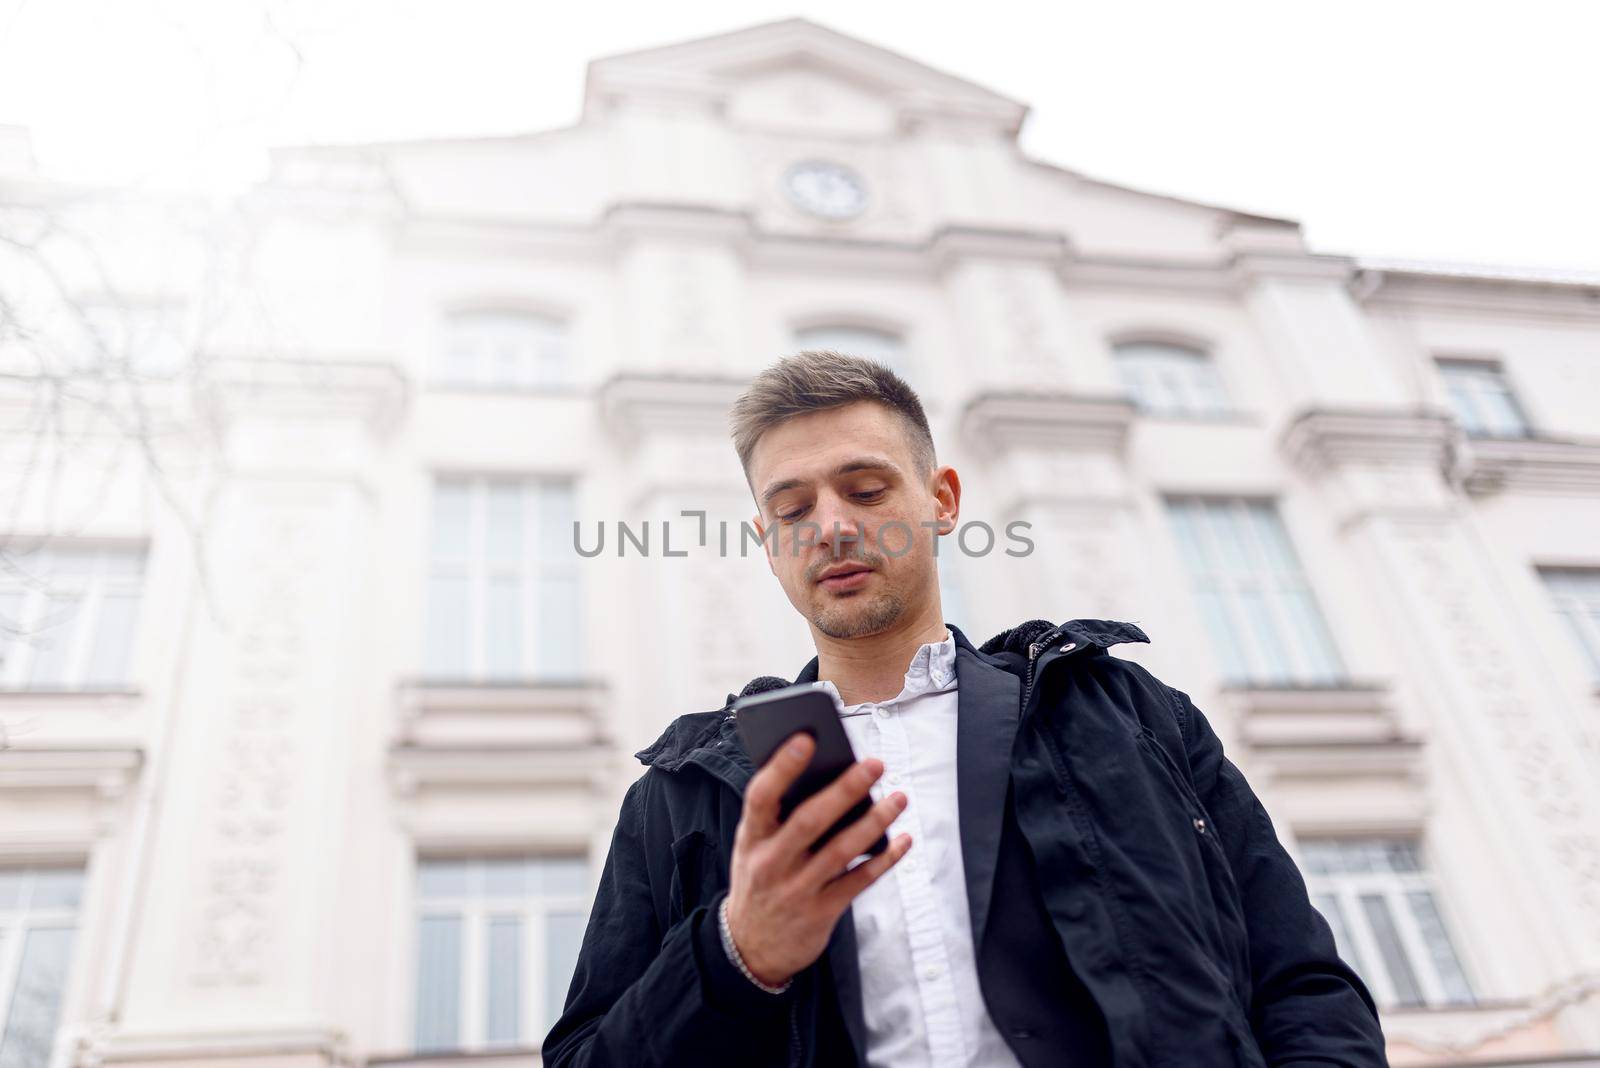 Waist up of handsome man in black jacket looking at smartphone screen in the city. Copy space. Lifestyle concept